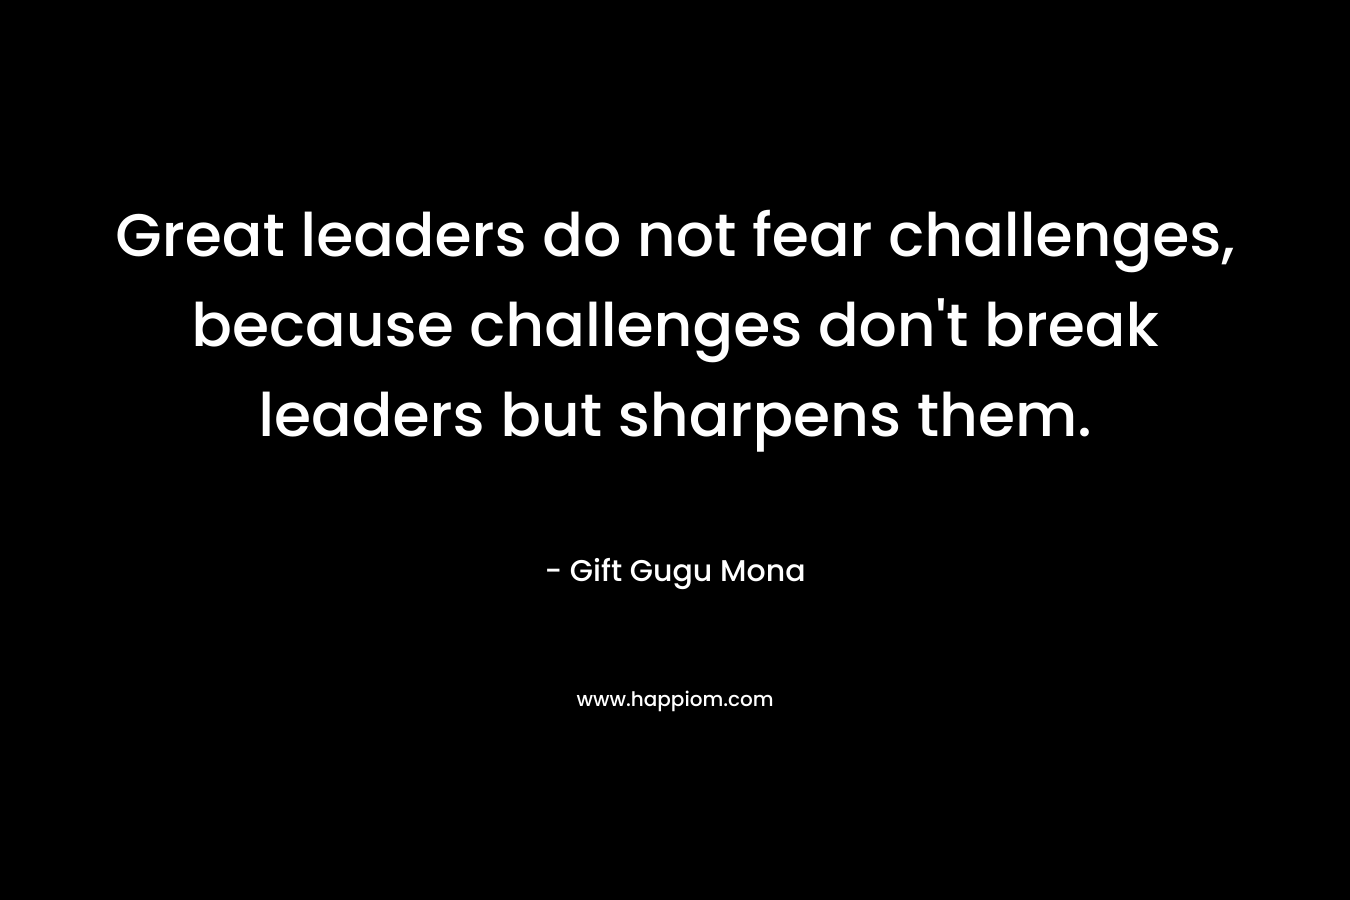 Great leaders do not fear challenges, because challenges don't break leaders but sharpens them.